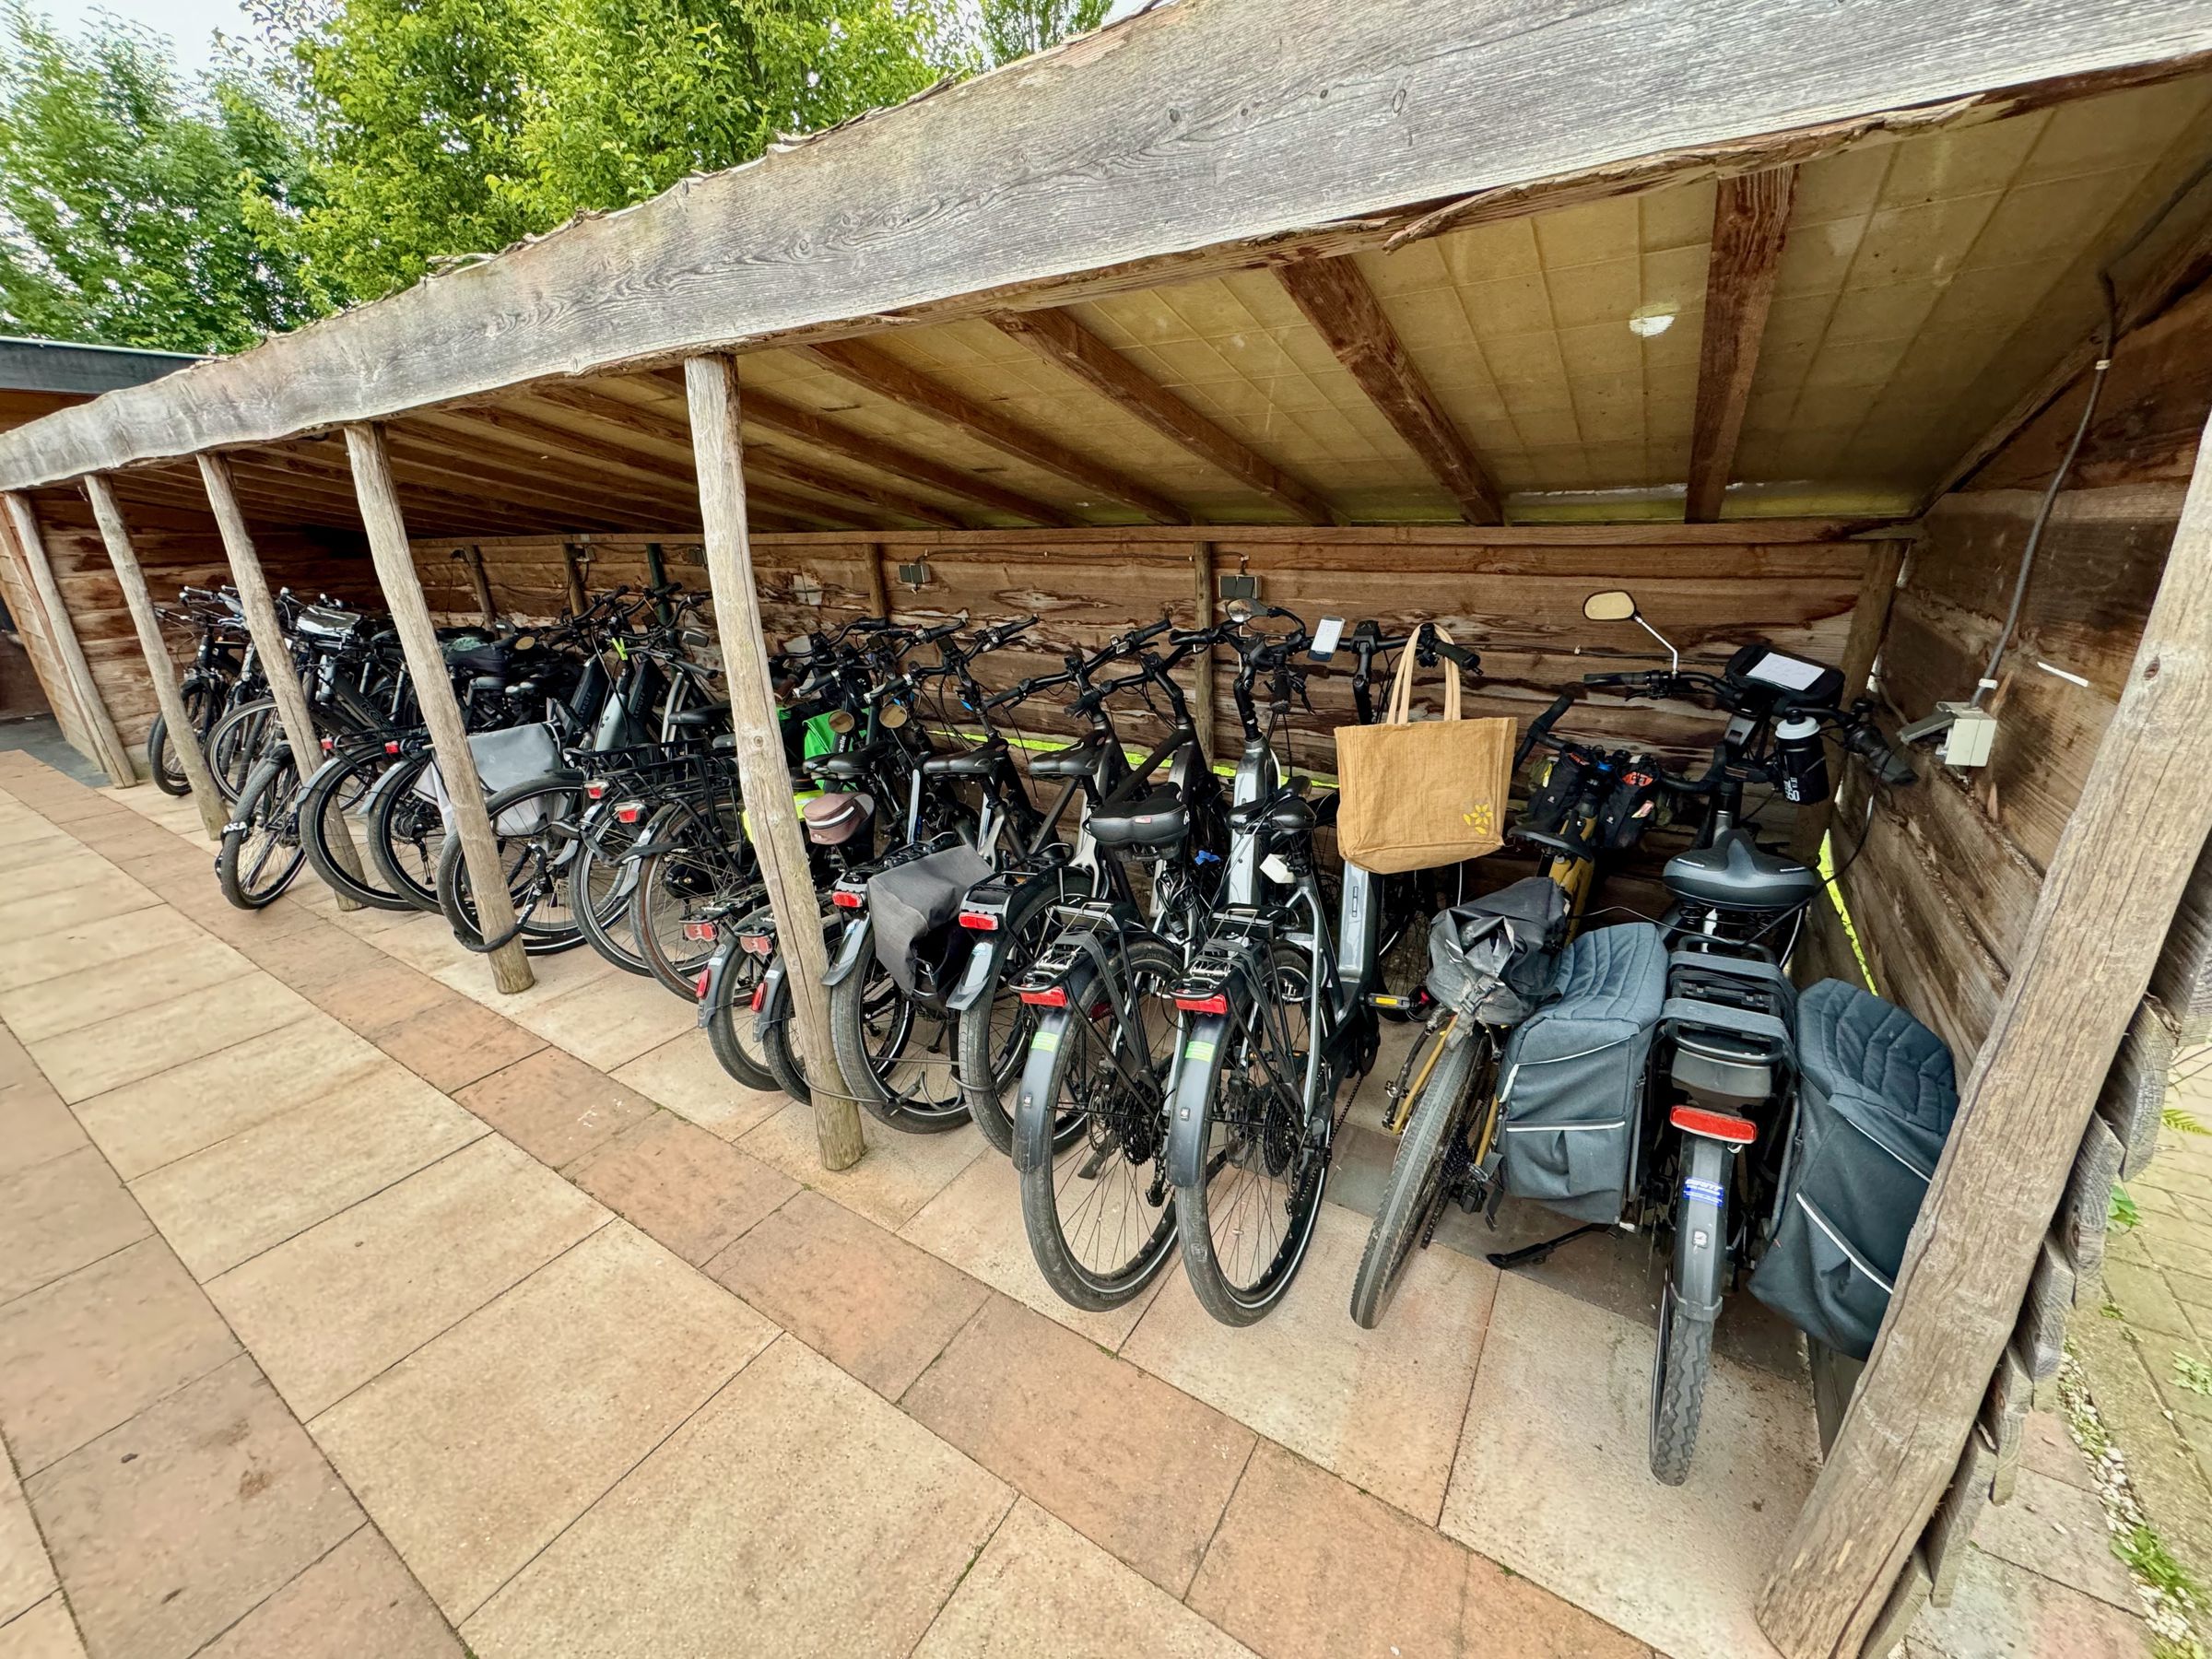 <em>These are almost entirely e-bikes that mostly arrived strapped to the backs of RVs by nomadic over 60-year-olds.</em>